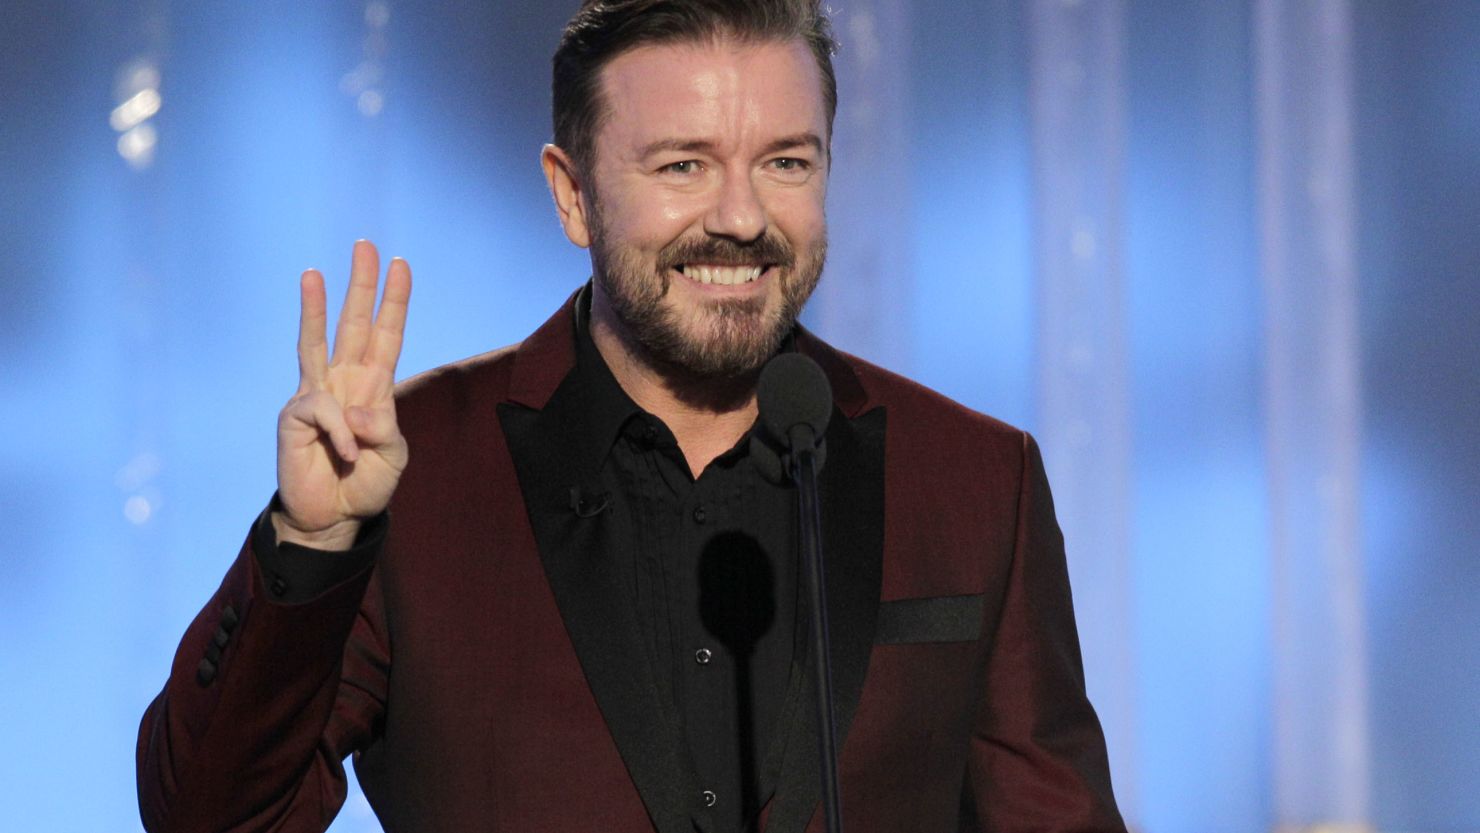 The Golden Globes also saw a ratings spike in 2011 -- could it be because of Ricky Gervais' controversial hosting? 